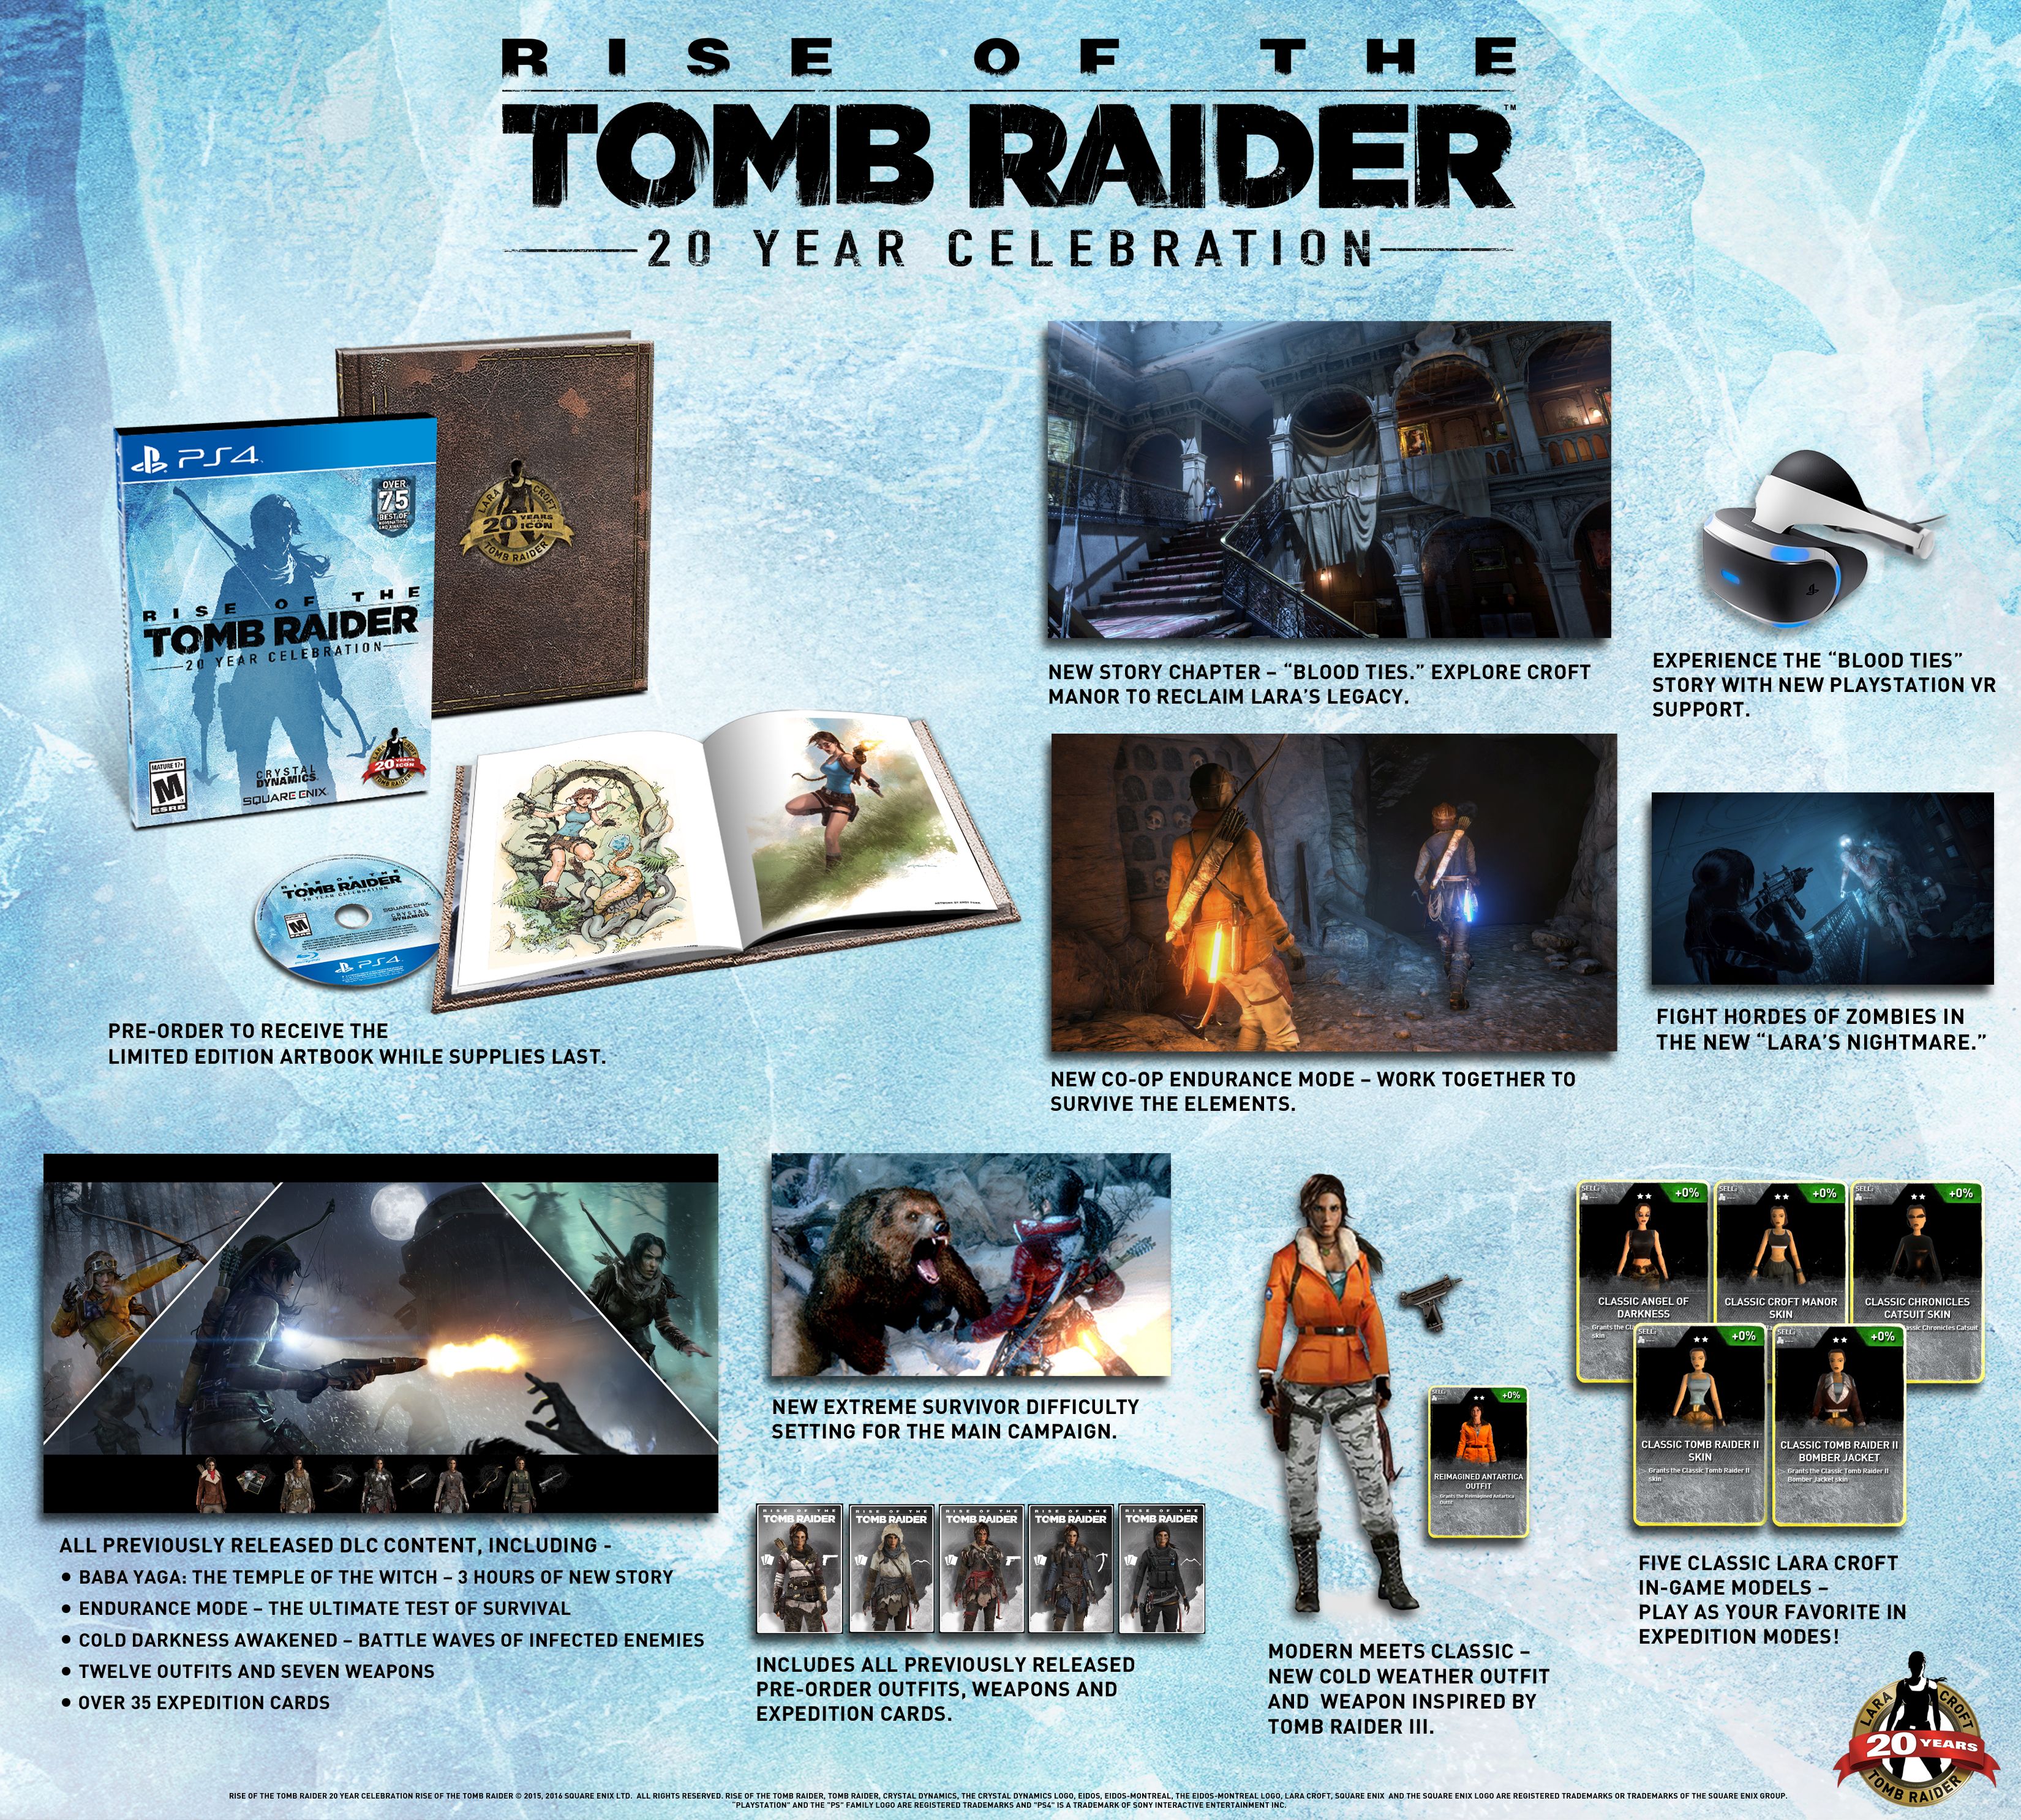 Rise-of-the-Tomb-Raider_2016_07-19-16_010